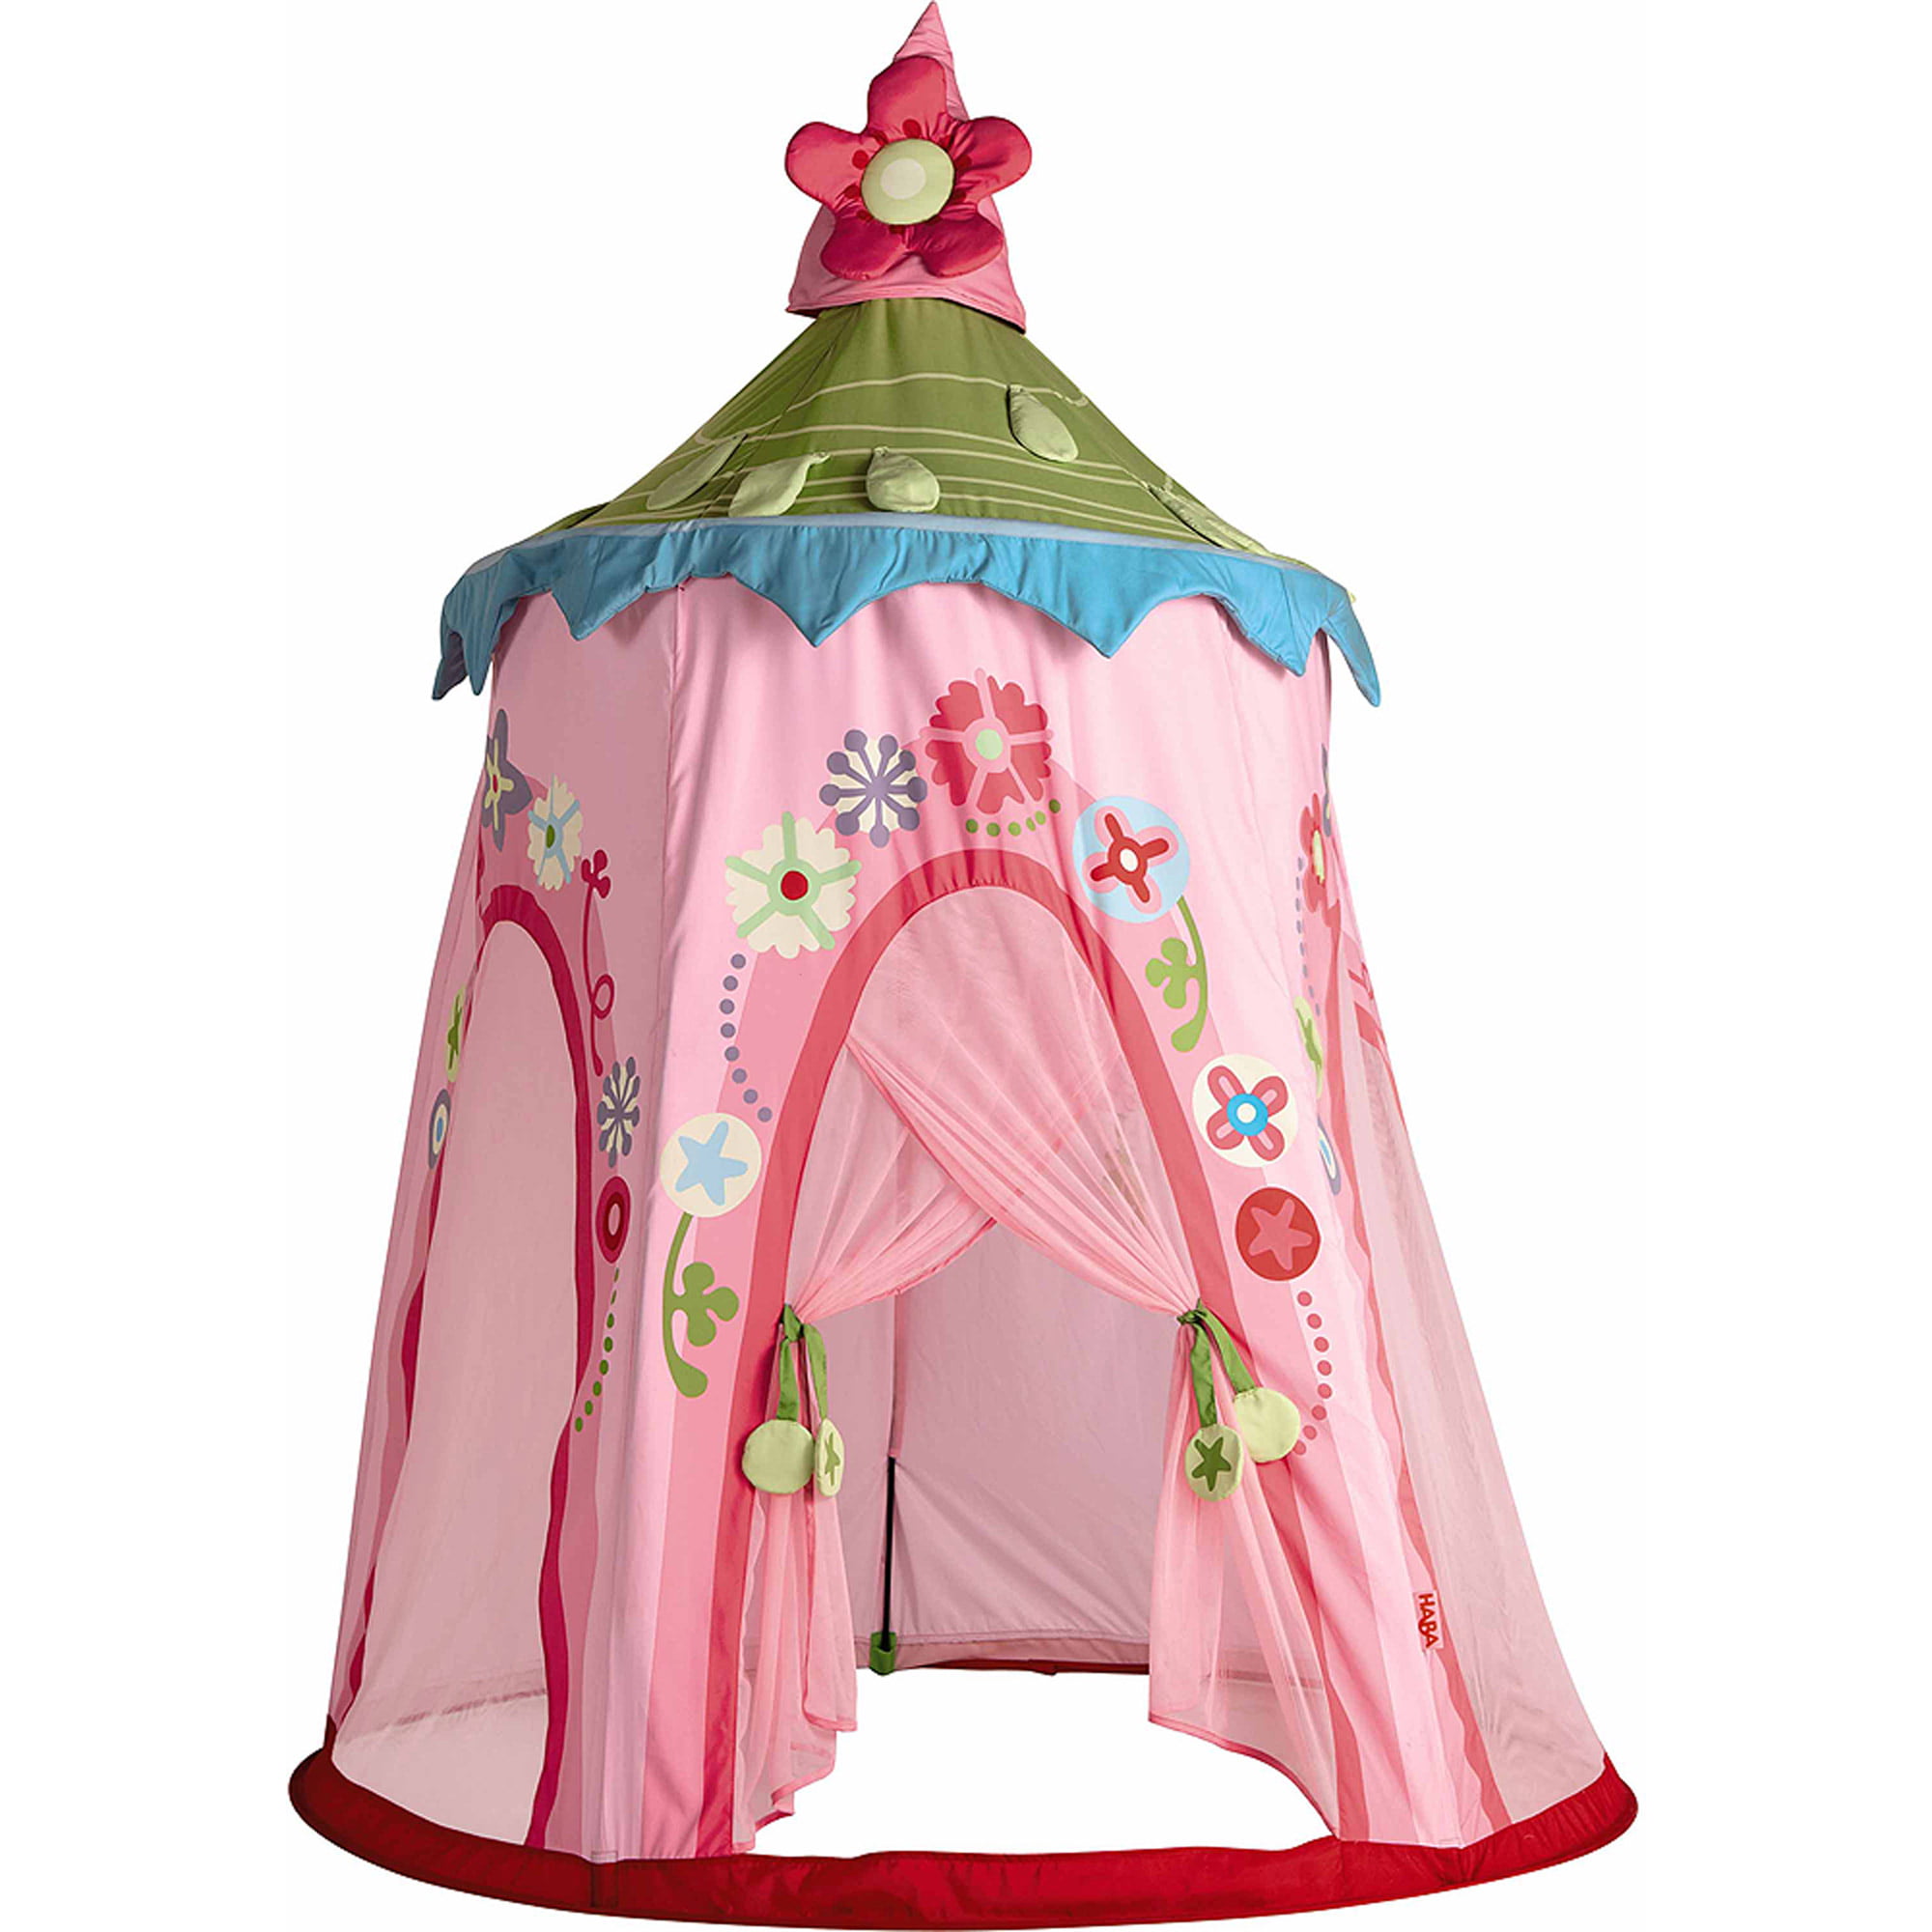 Floral Wreath Play tent